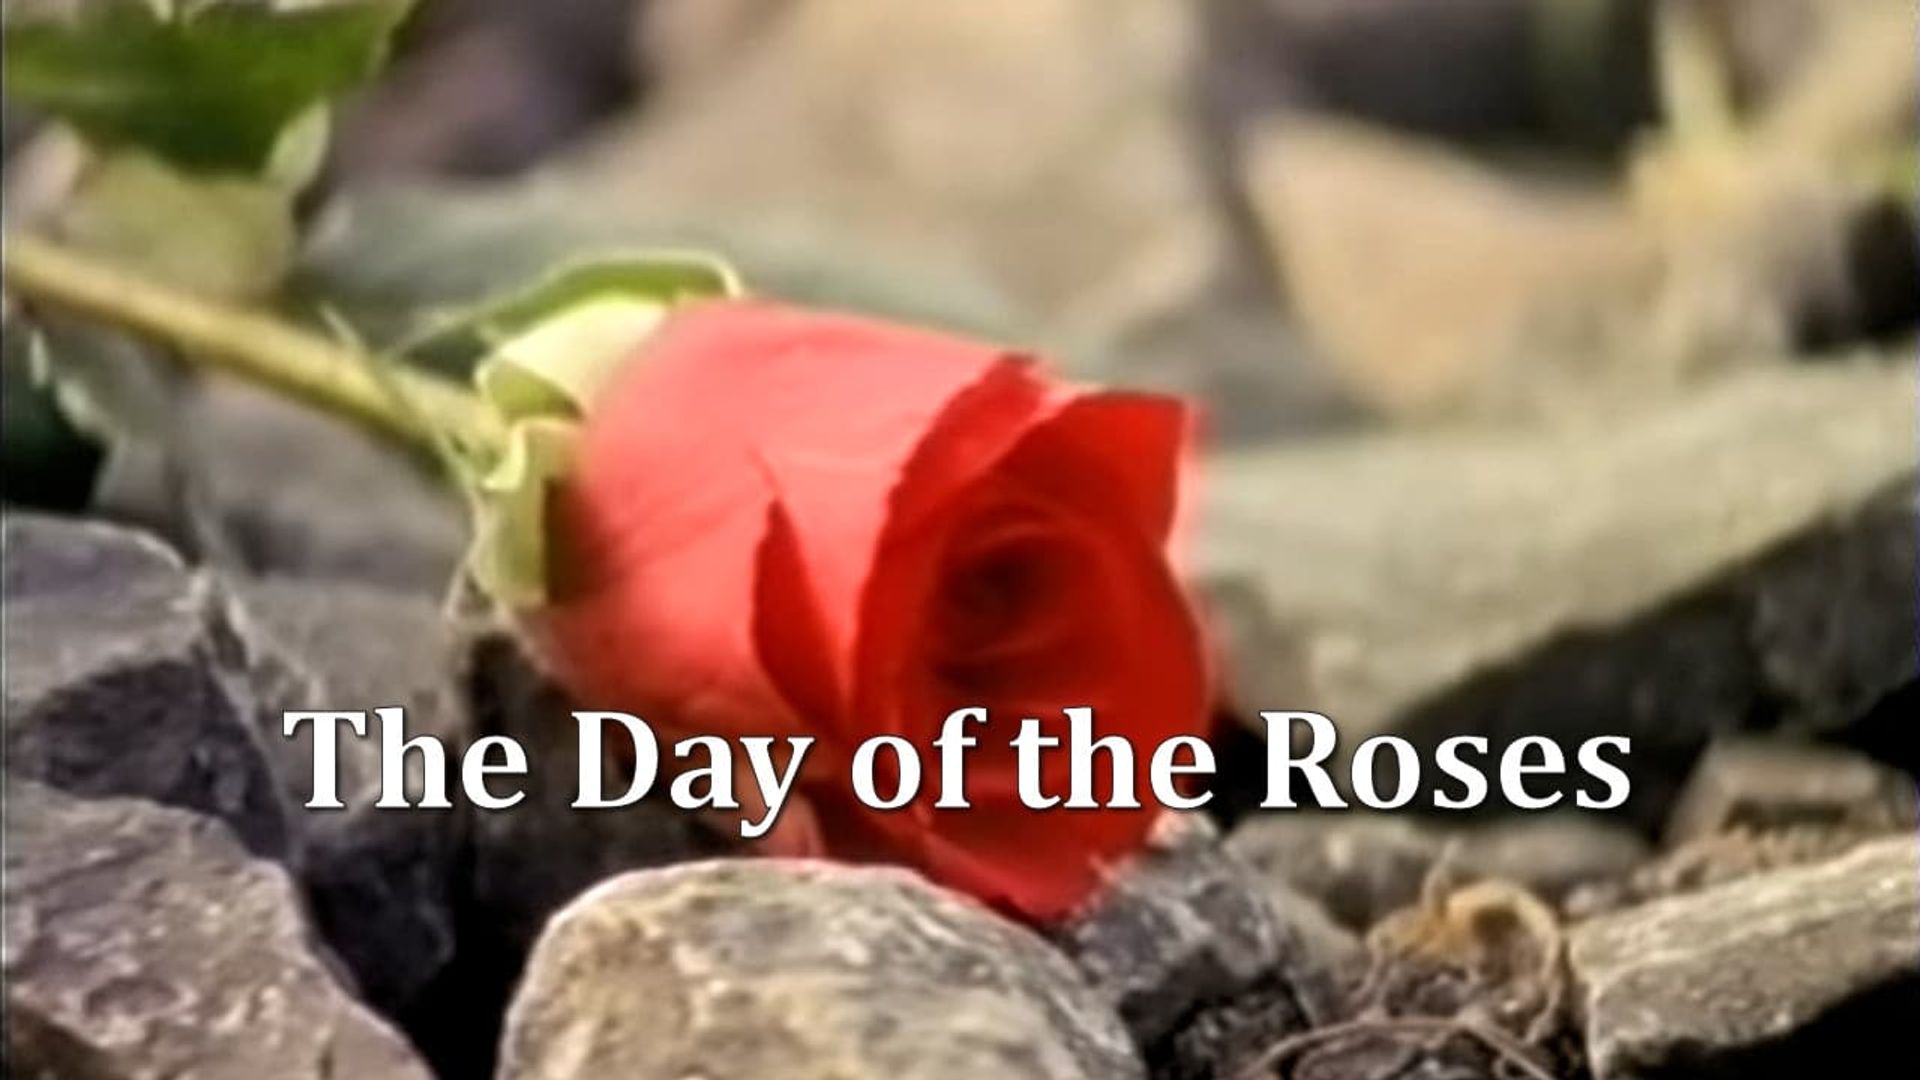 The Day of the Roses background